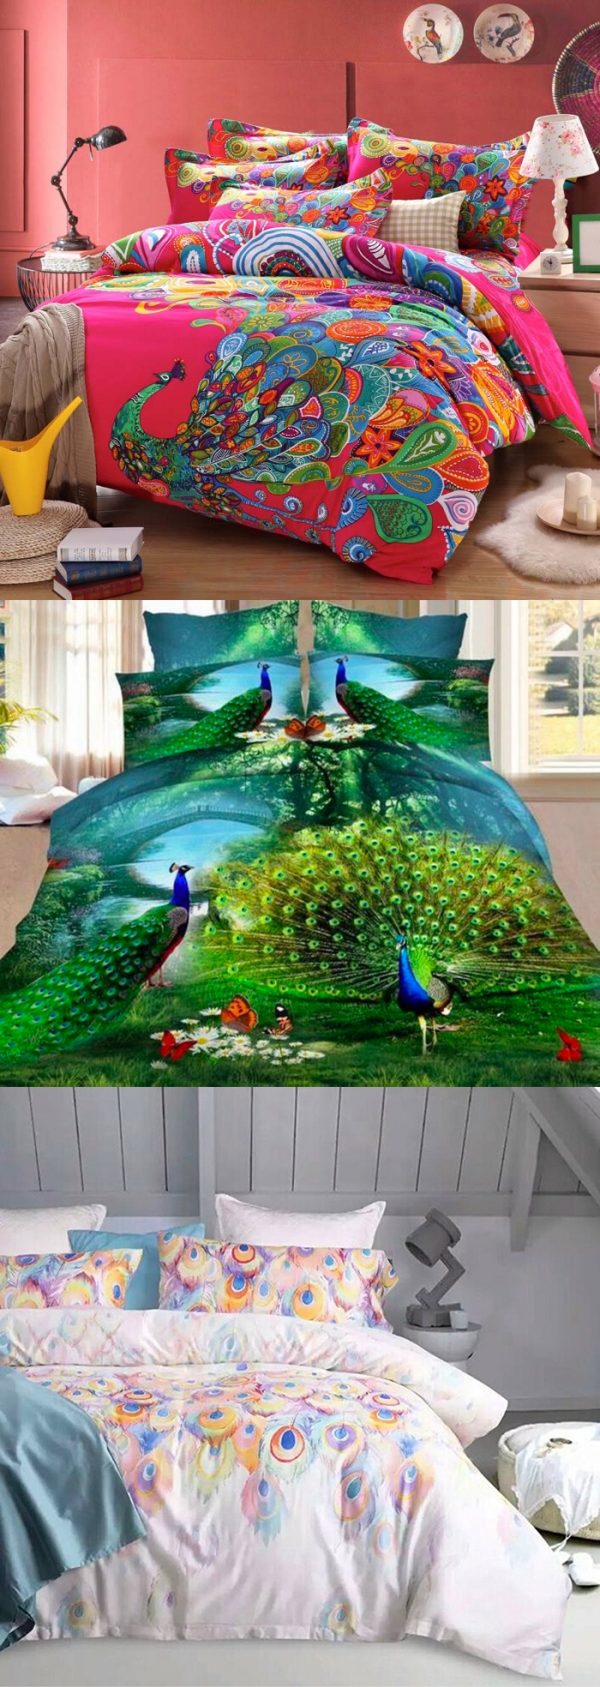 52 Captivating Peacock Home Decor Accessories